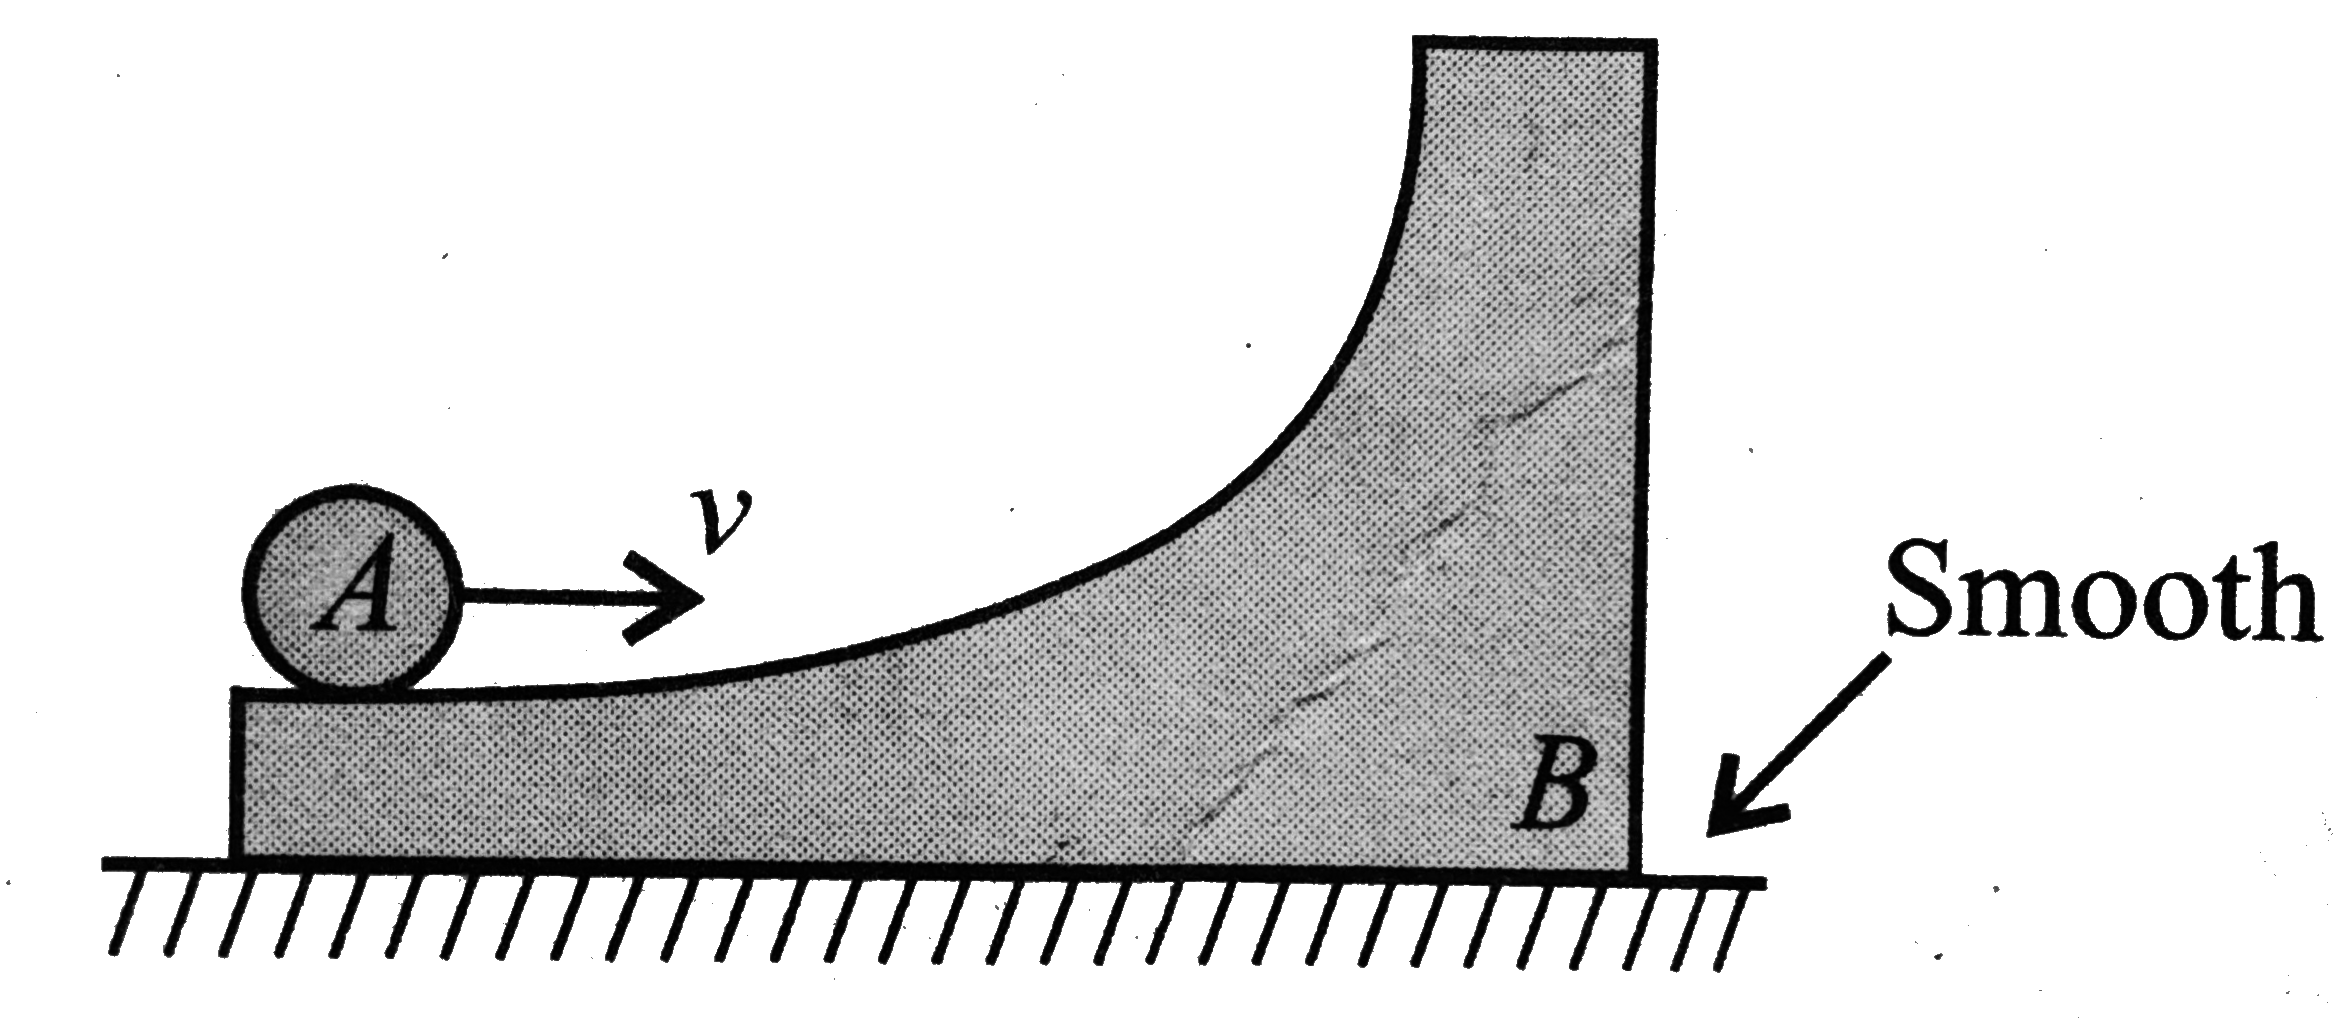 In the figure shown, a ring A is initially rolling without sliding with a velocity v, on the horizontal surface of the body B (of same mass as A). All surfaces arc smooth. B has no initial velocity. What will be the maximum height reached by A on B?